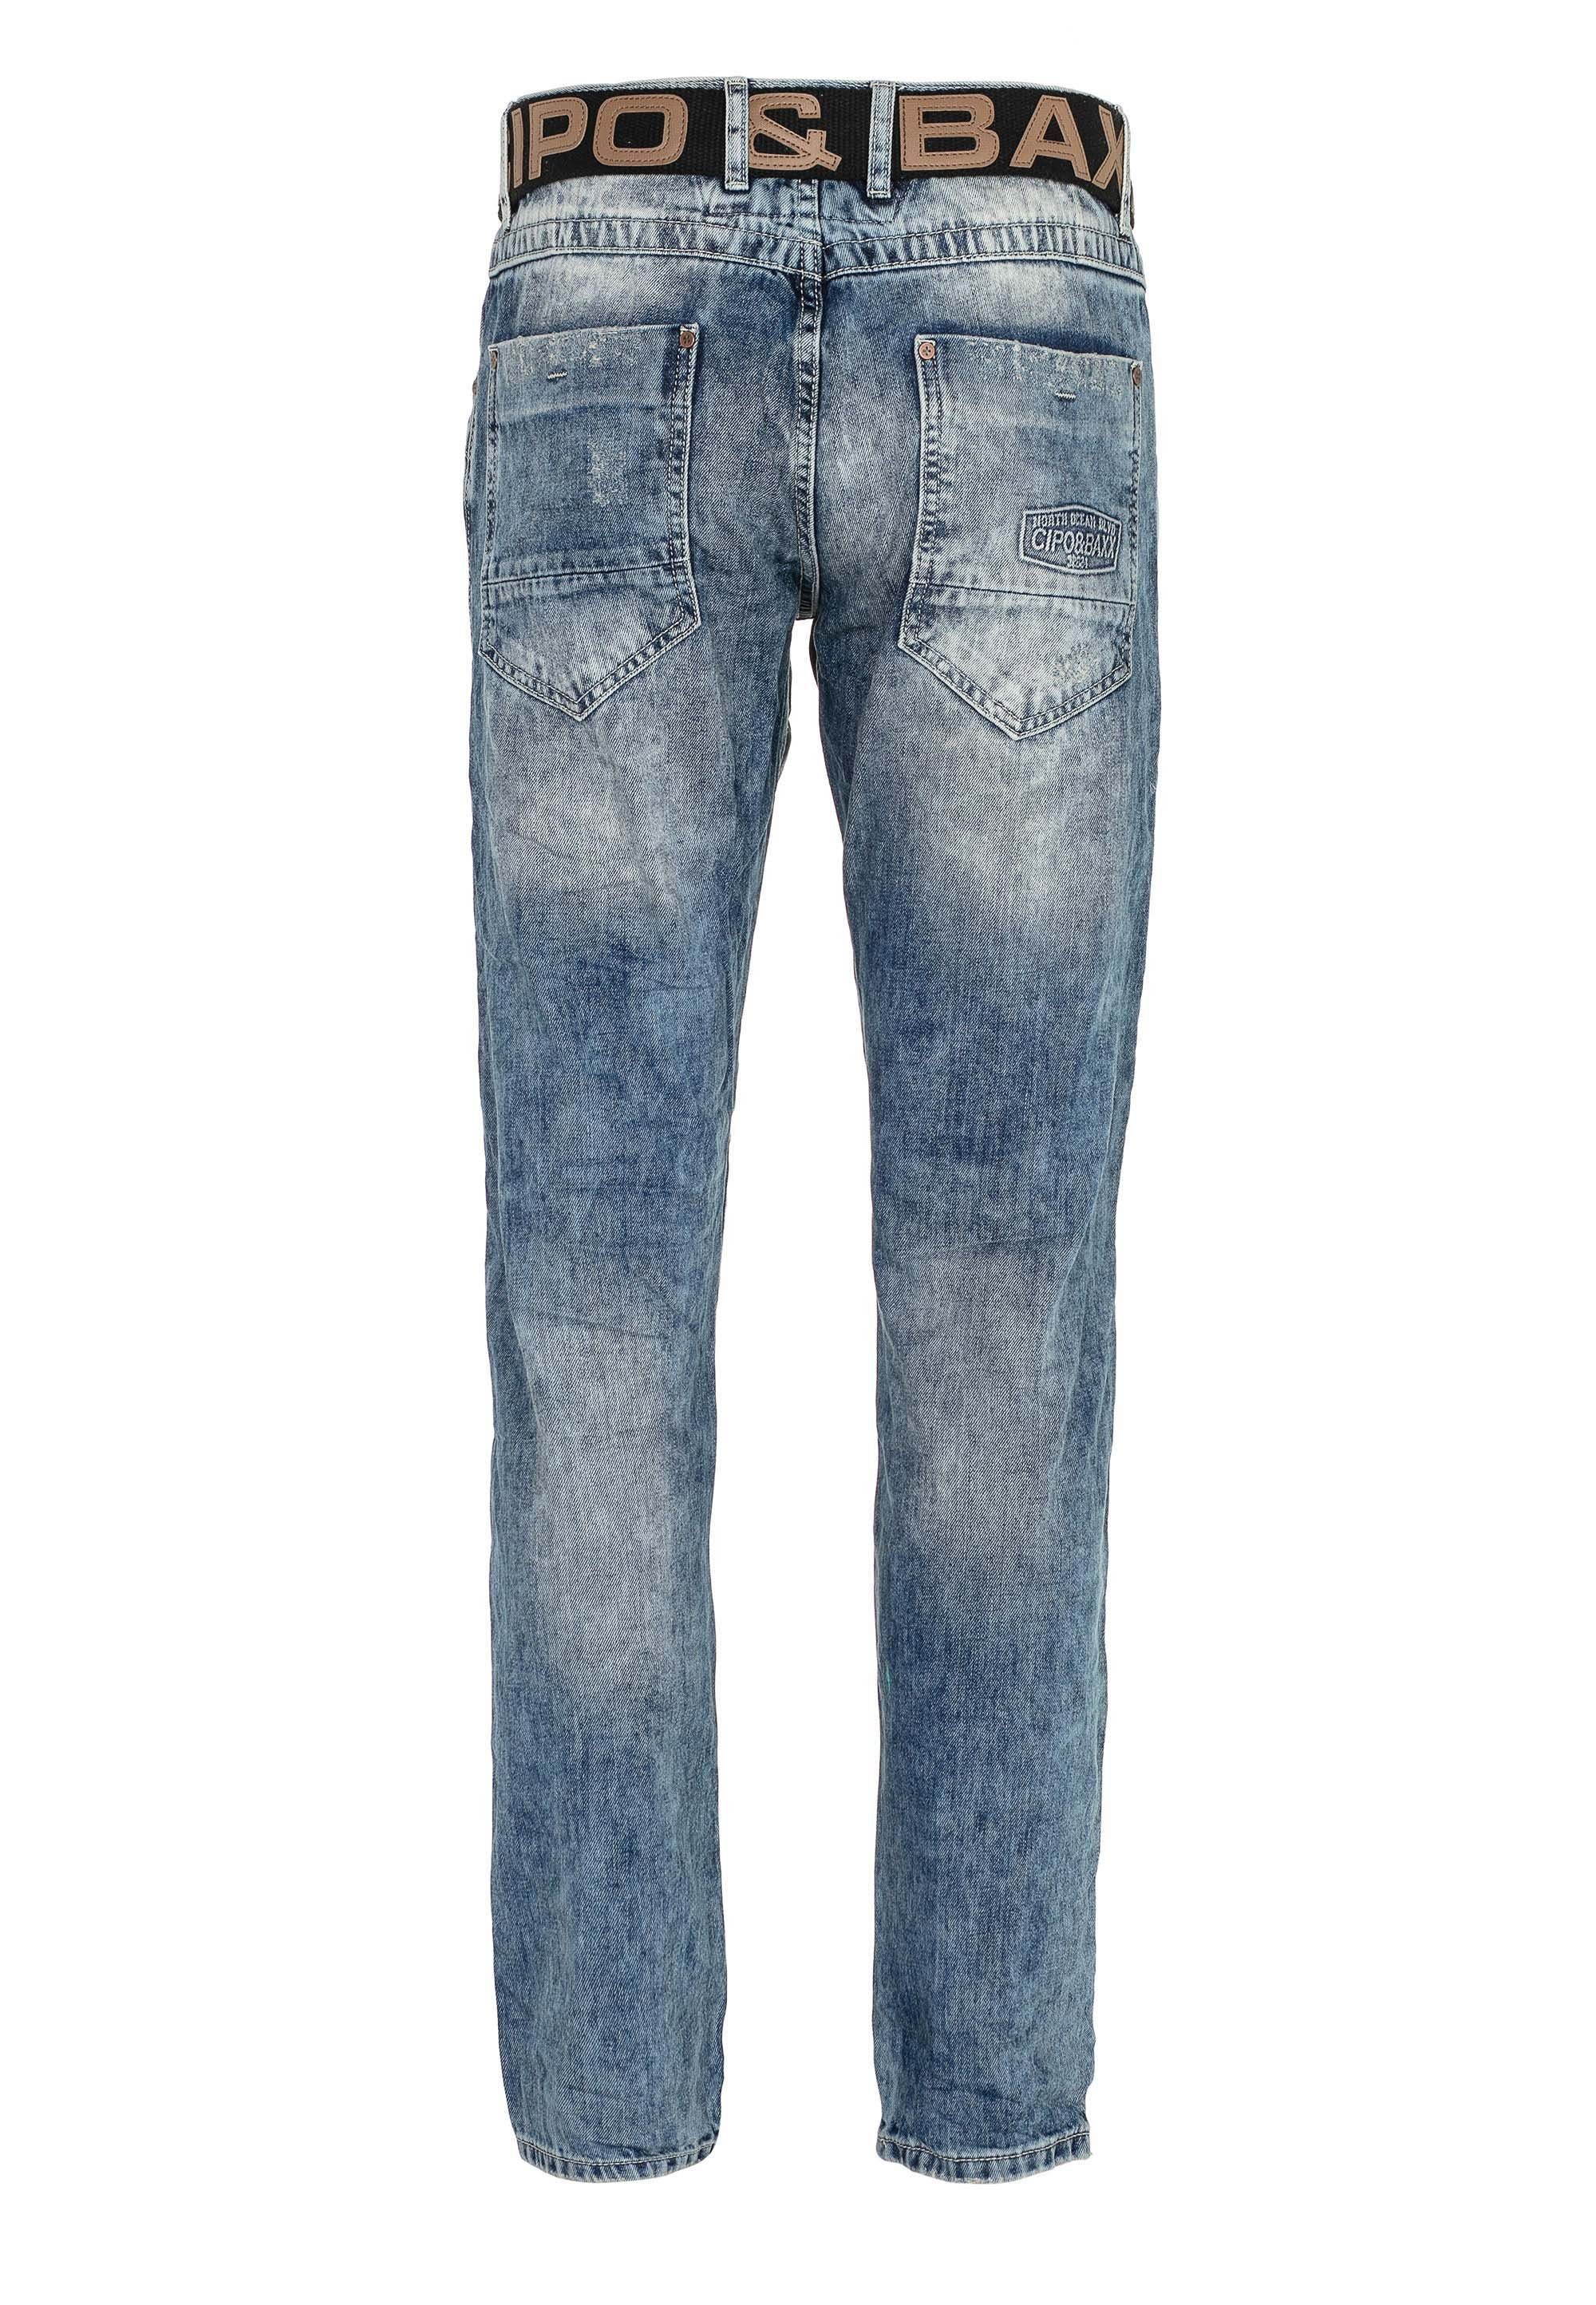 Cipo & Baxx Ripped in Bequeme Details mit Jeans Straight-Fit